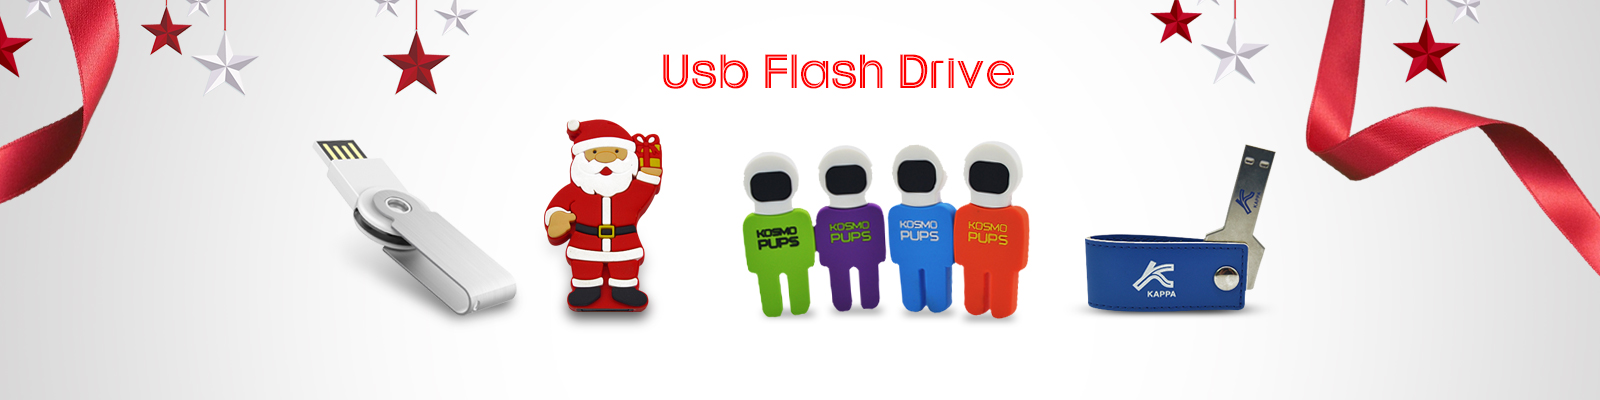 Usb pen | Flash memory | Usb 2.0 | Flash drive supplier | leadway group limited